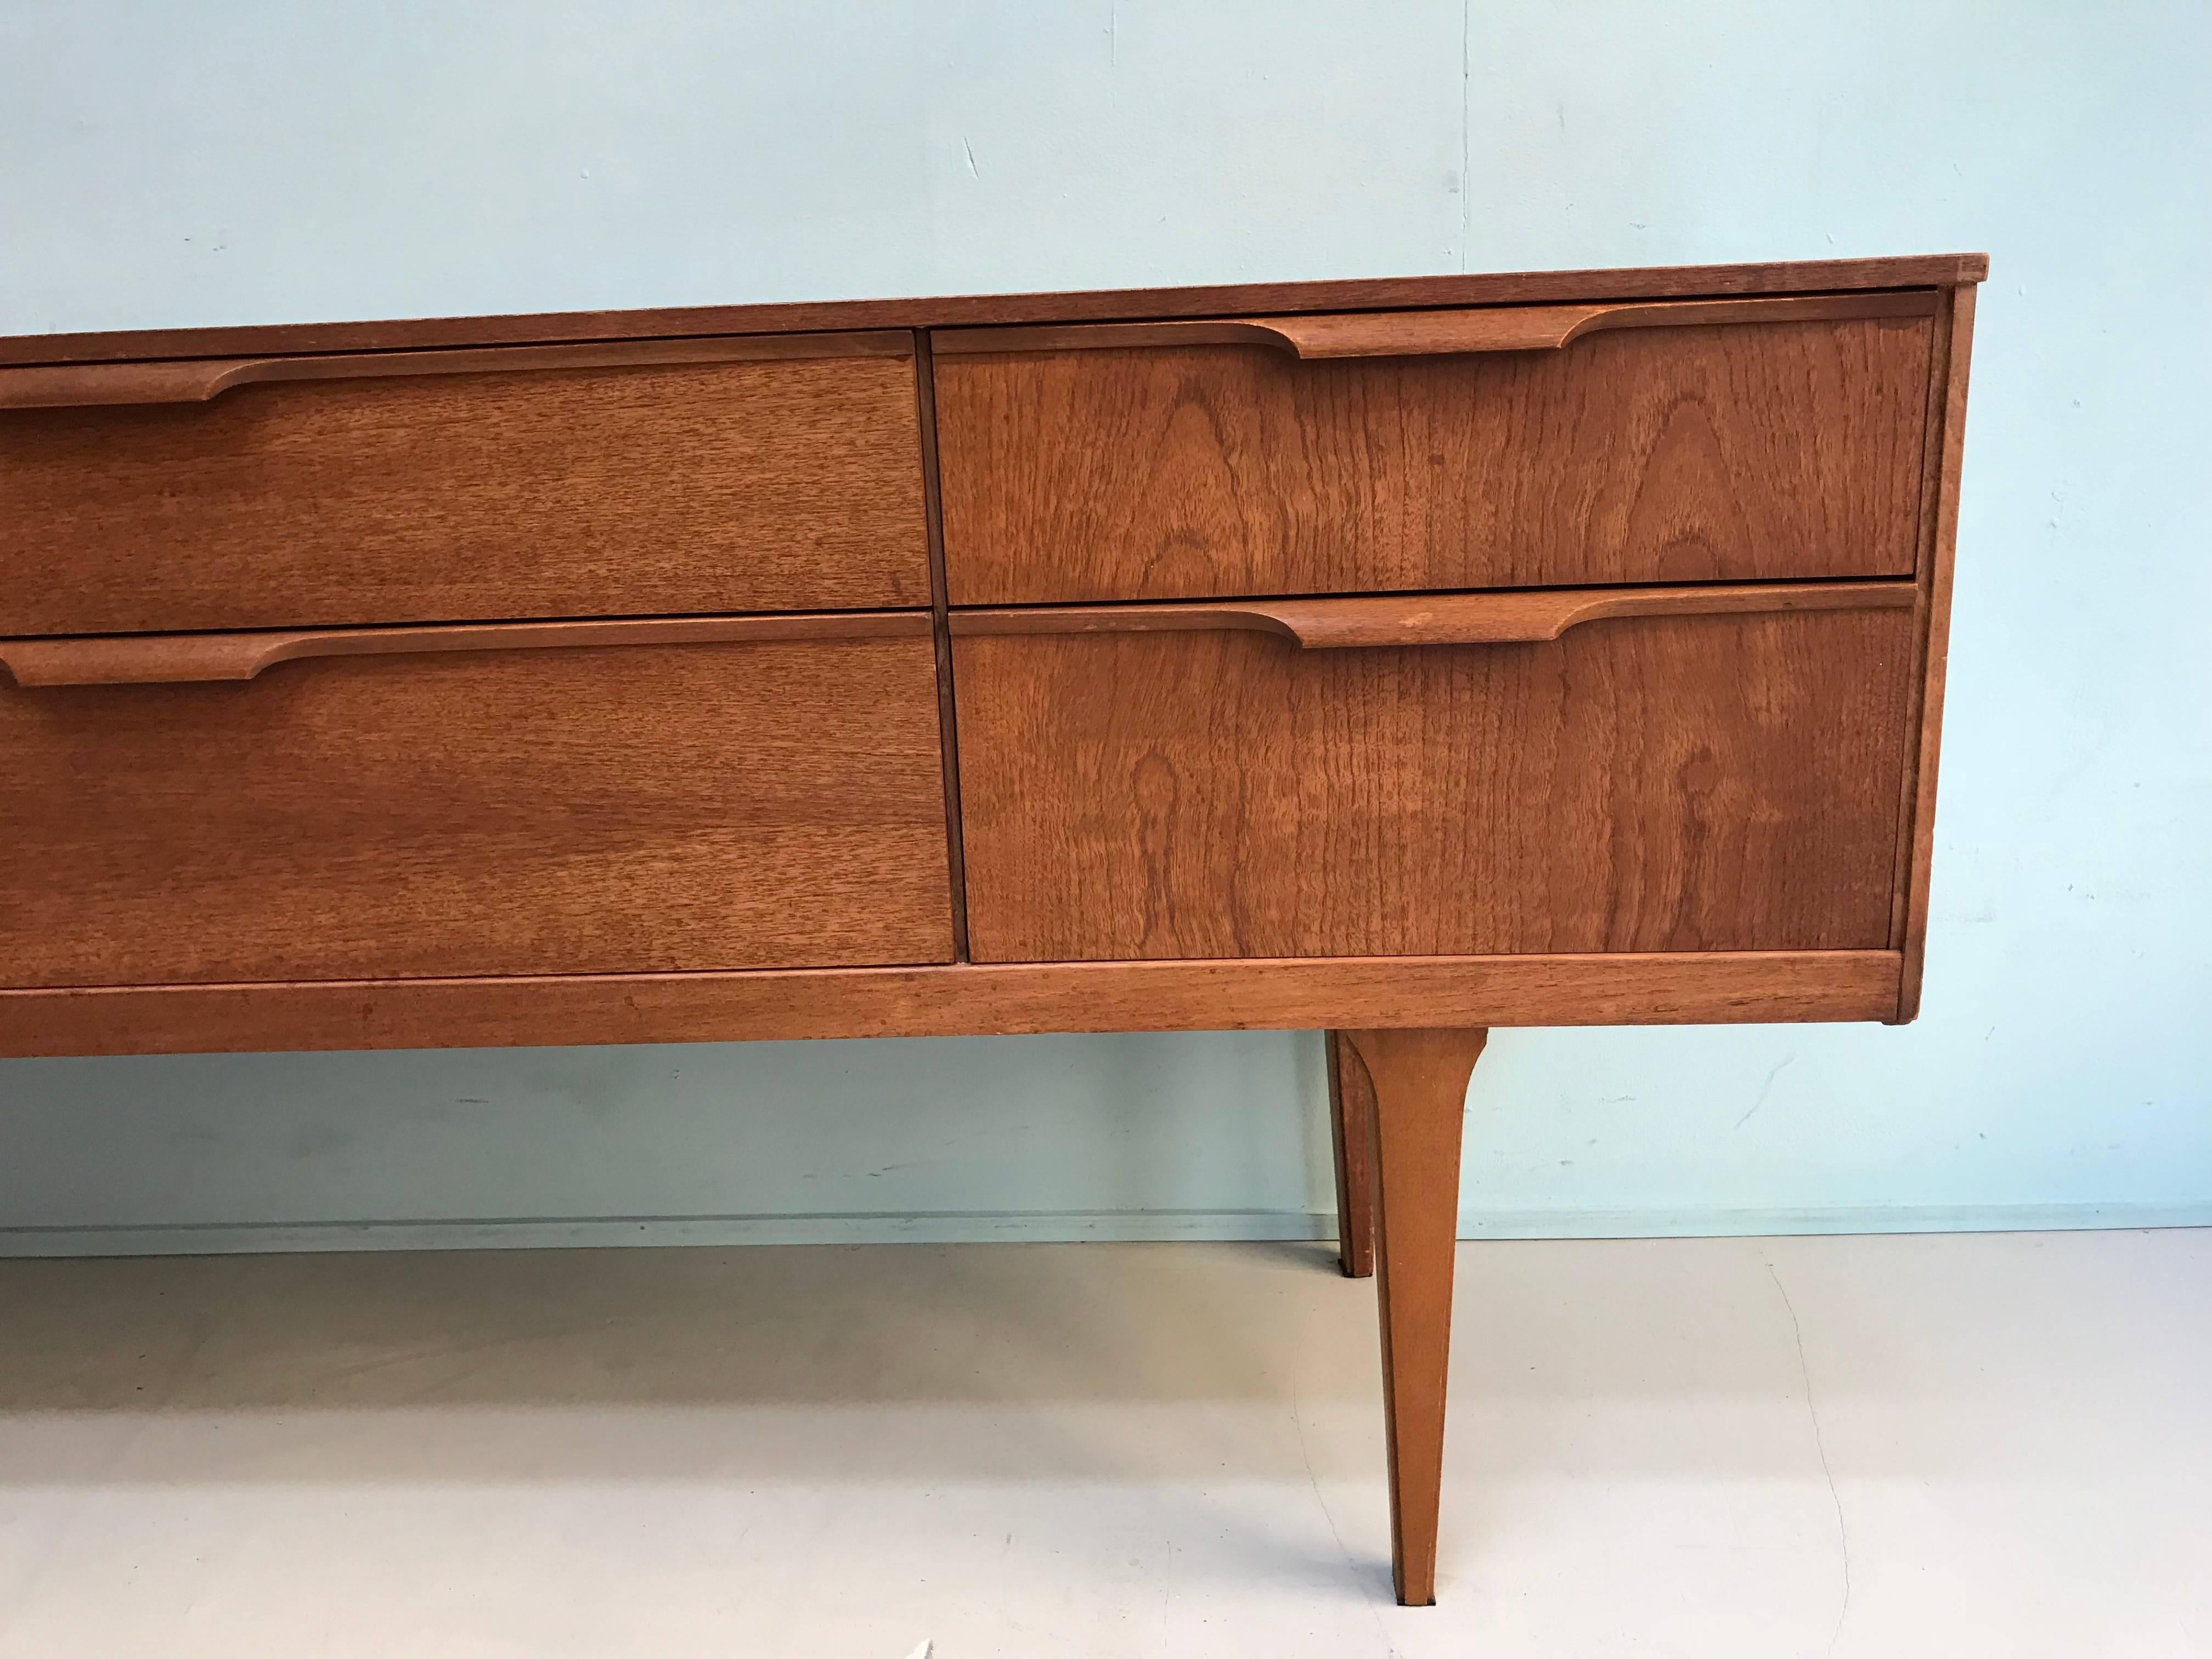 Teak sideboard with six drawers made of teak by Austinsuite design by Franck Guille.
Condition: very good.
Measurements:
170 cm W/ 41 cm D /70 cm H.

Itemnr: 241.